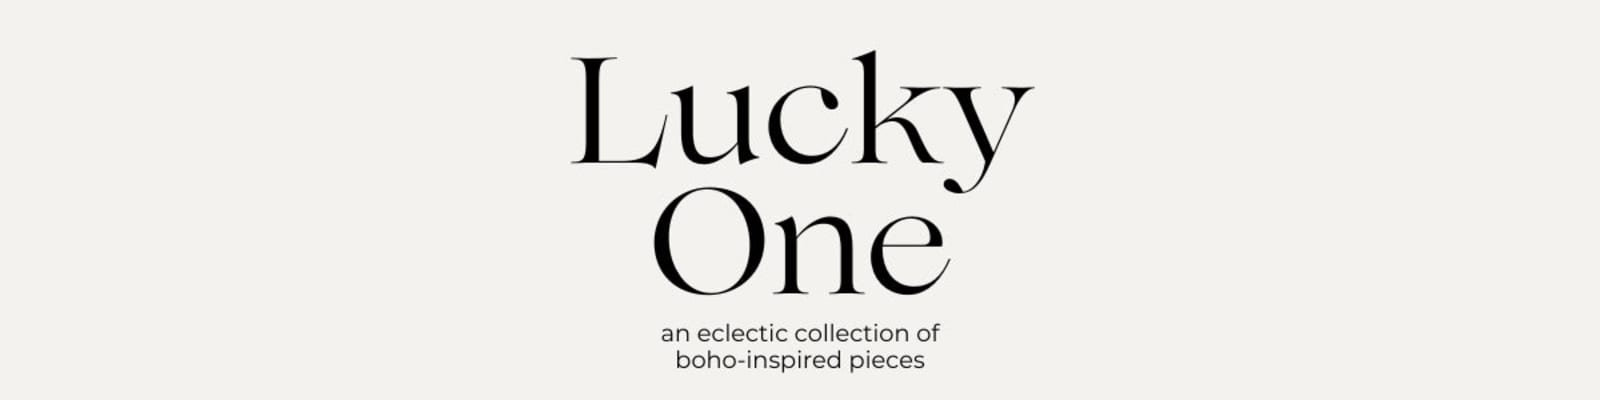 lucky one collection